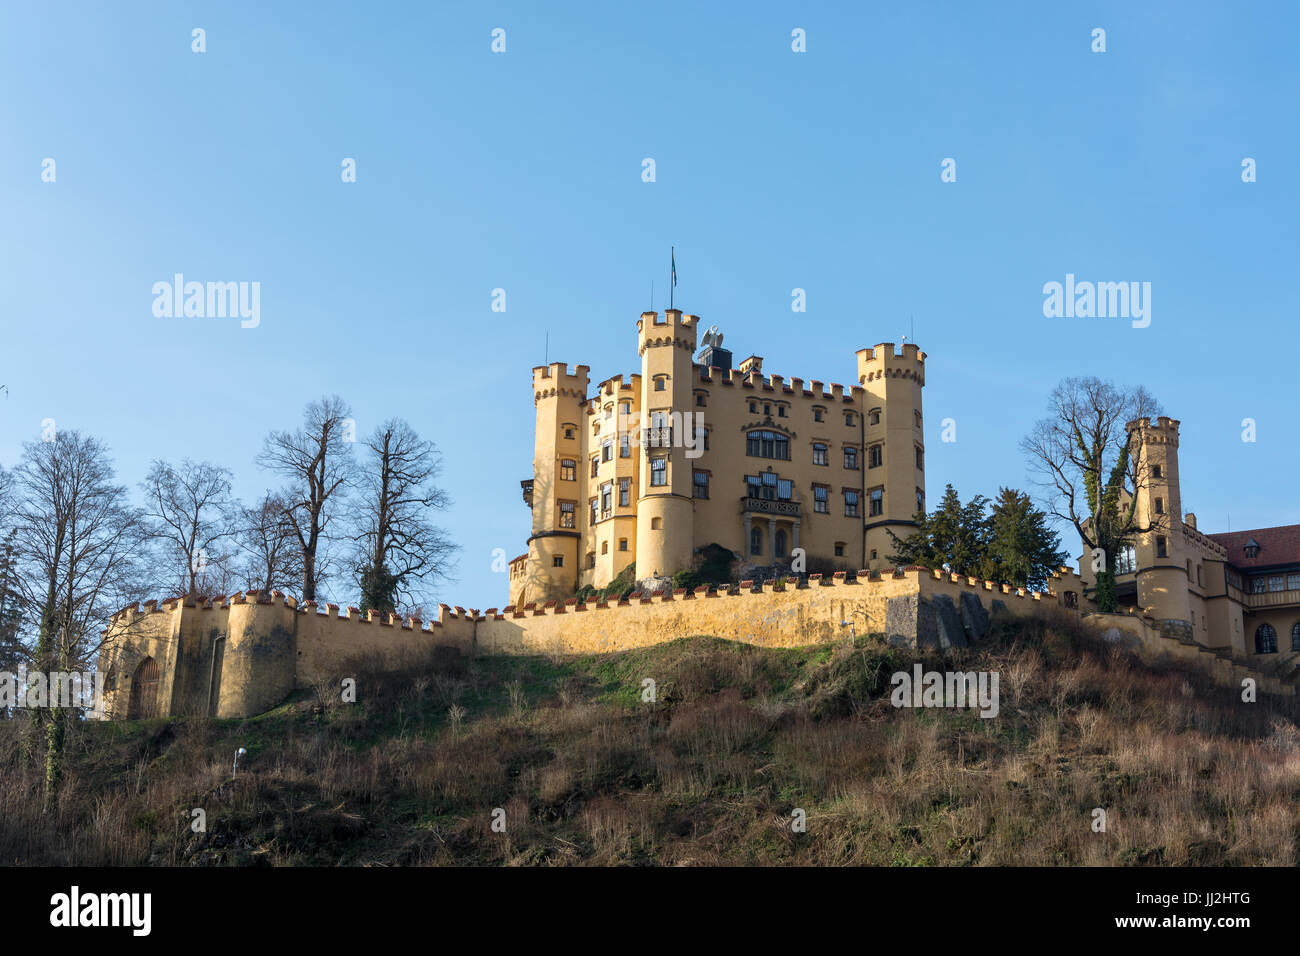 The castle Hohenschwangau on a hill in the sunny afternoon Stock Photo